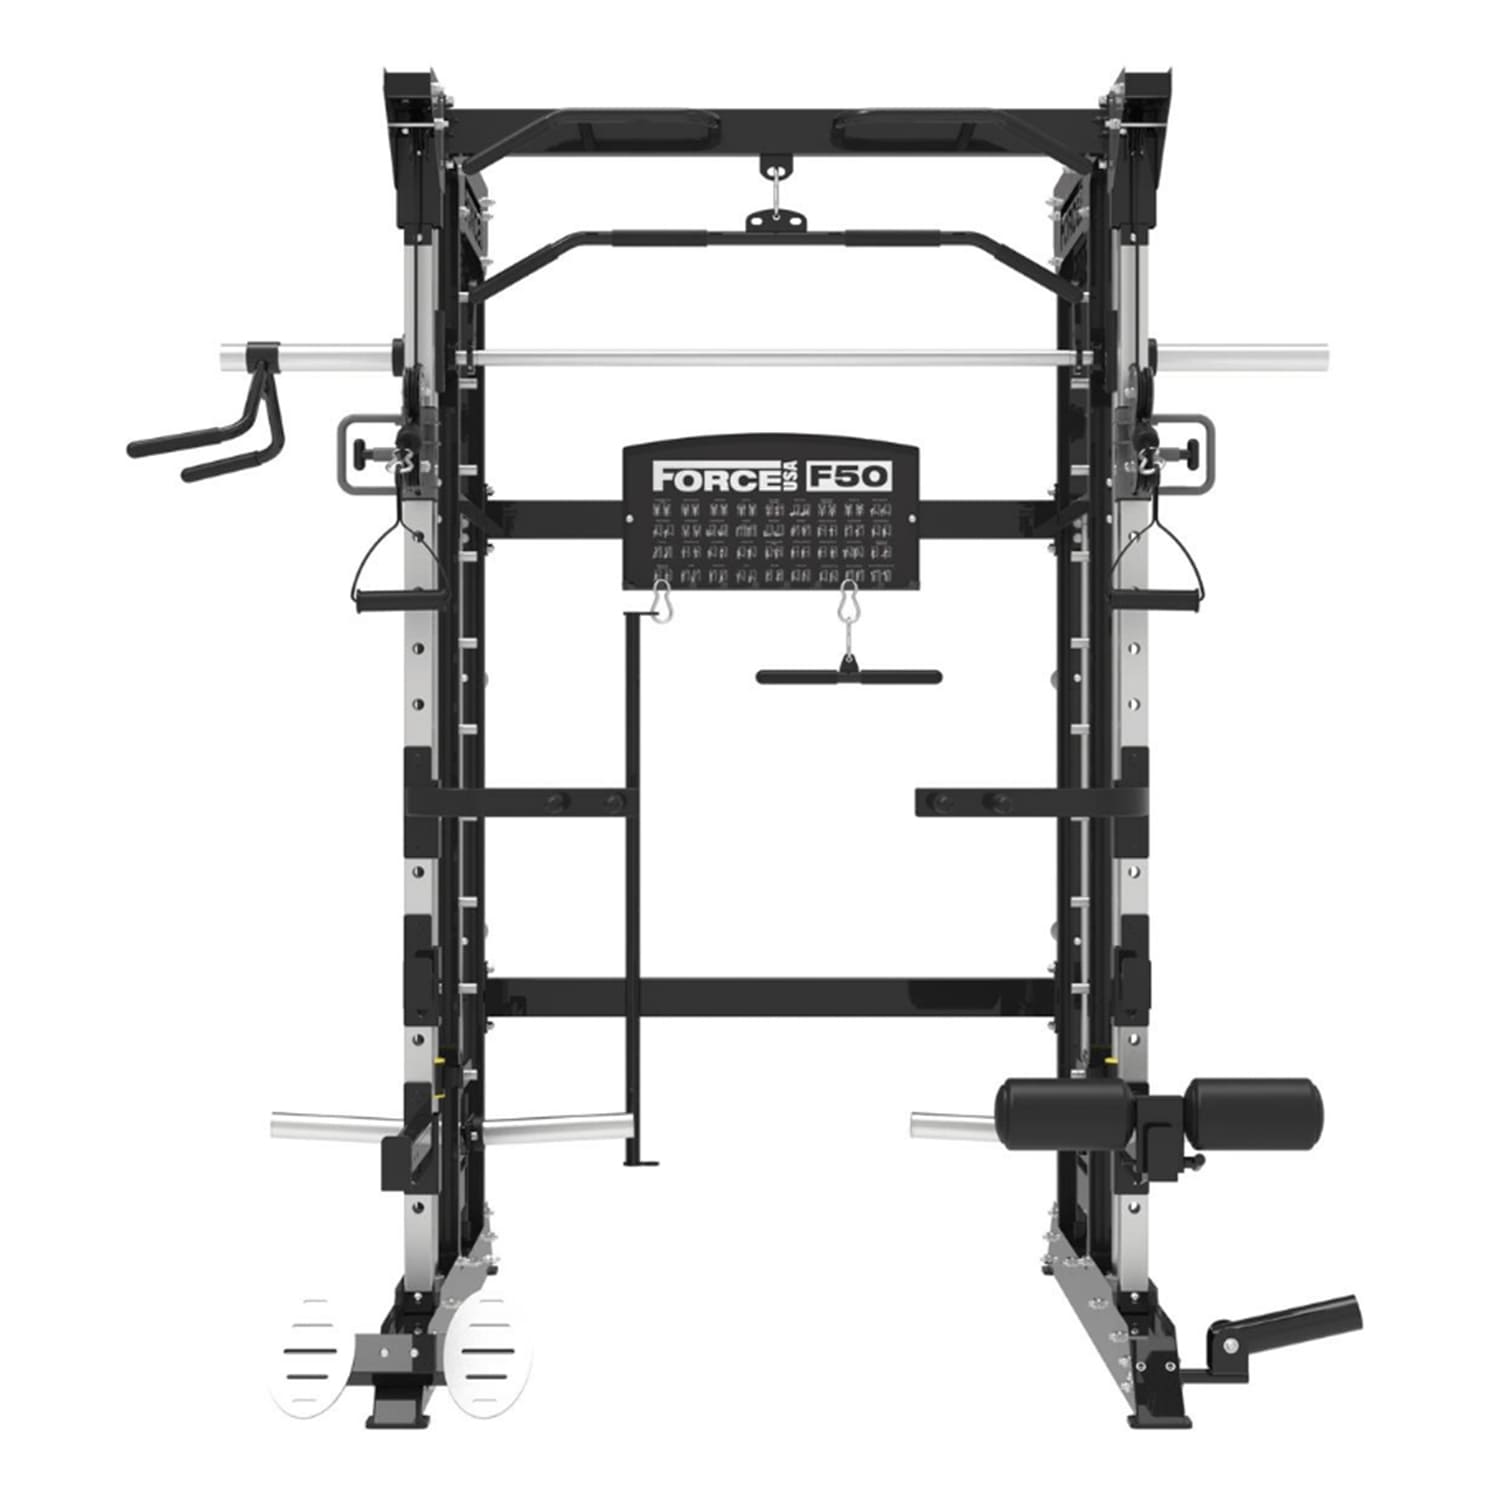 Force USA F50 All-In-One Trainer Plate Loaded (Includes 15kg Barbell)